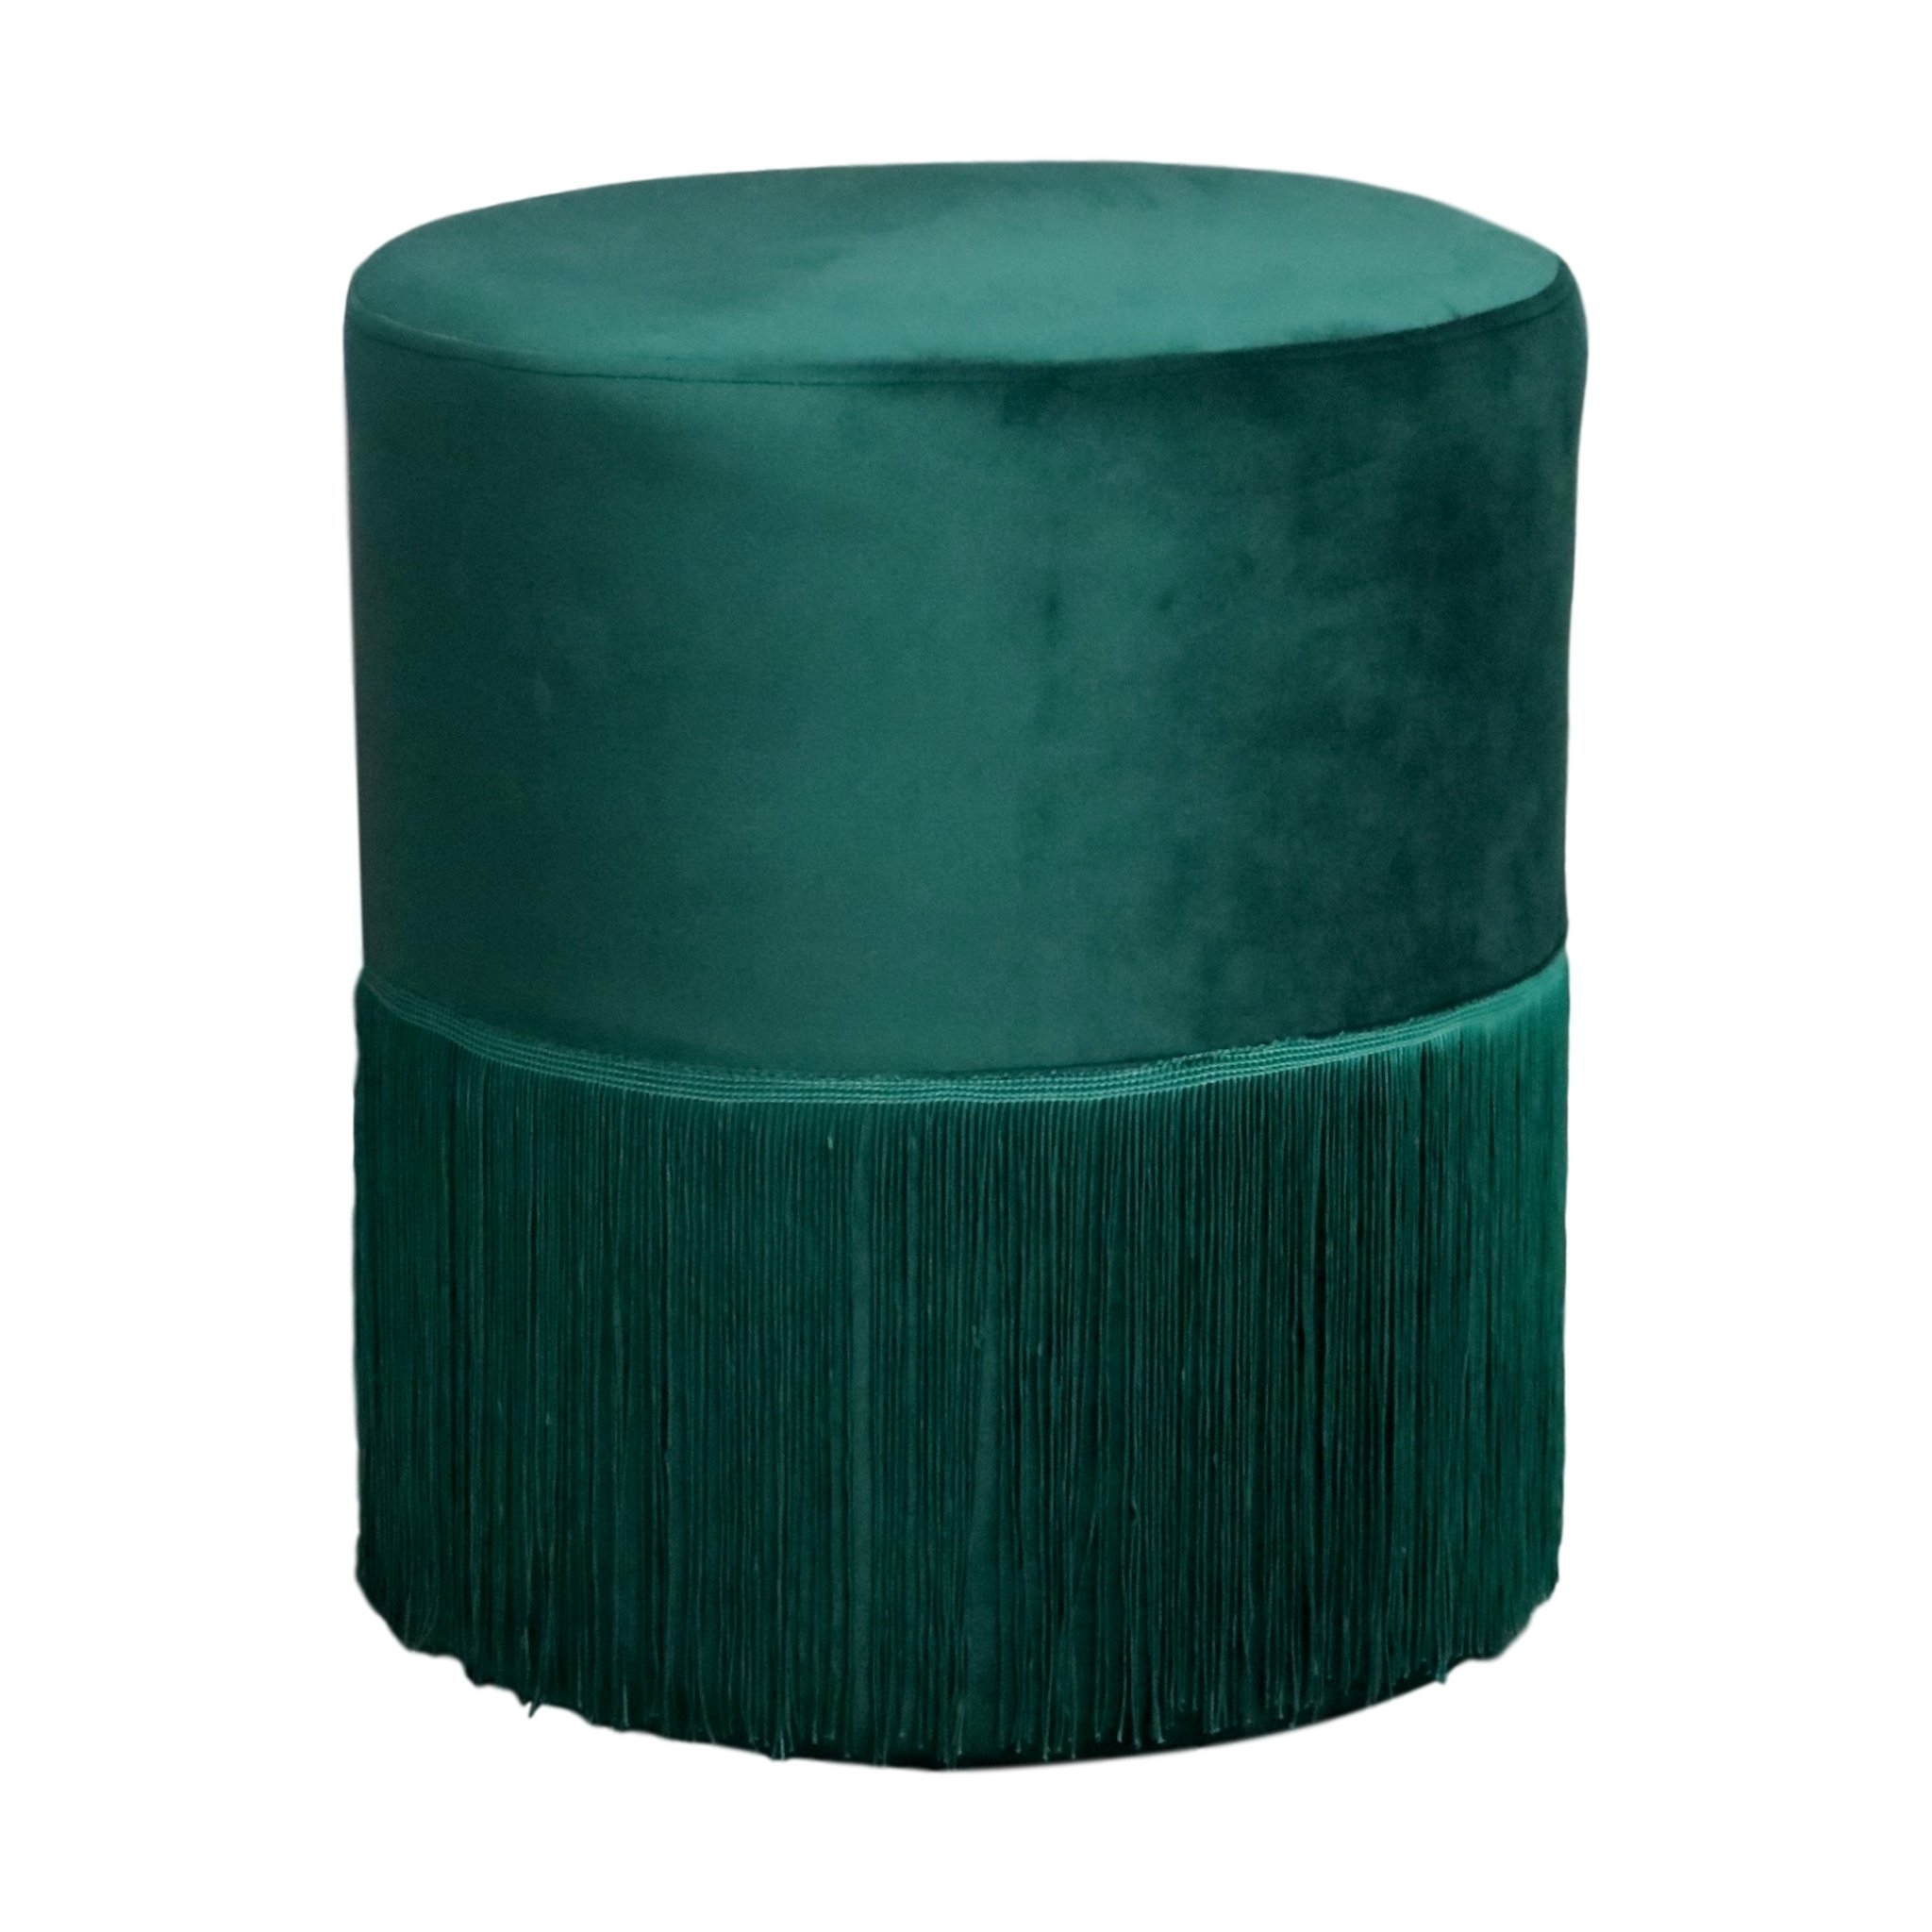 Native Home & Lifestyle Round Stool In Green Velvet with Tassels 38 x 38 x 43cm – Furniture & Homeware – The Luxe Home